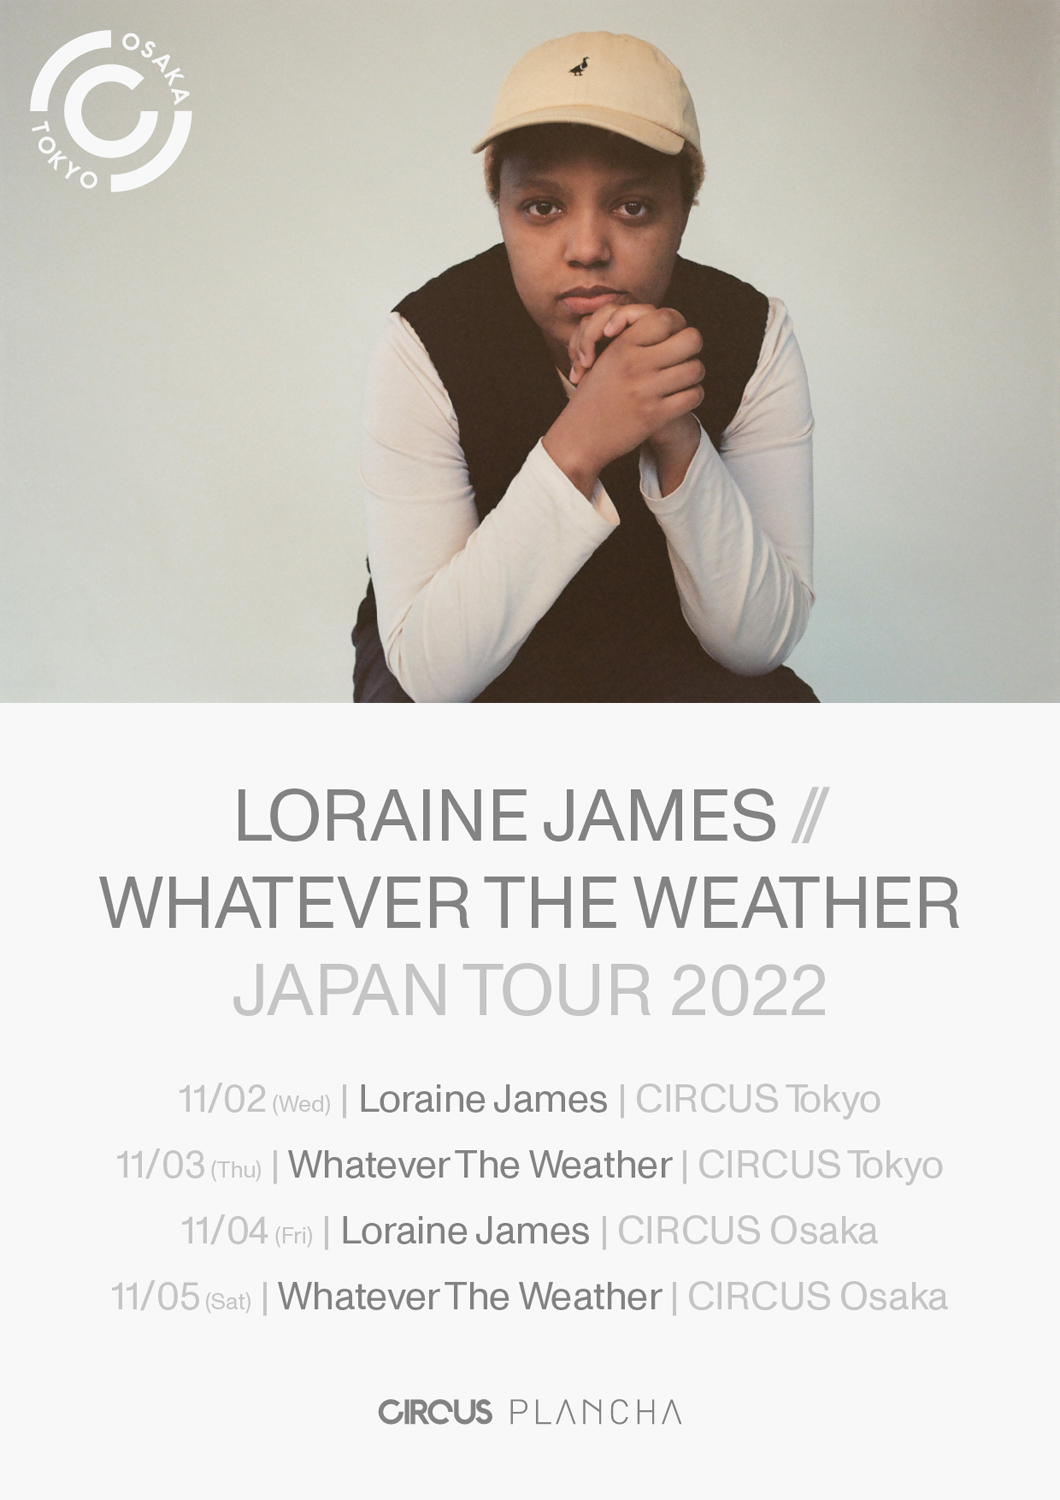 Loraine James // Whatever The Weather Japan Tour 2022